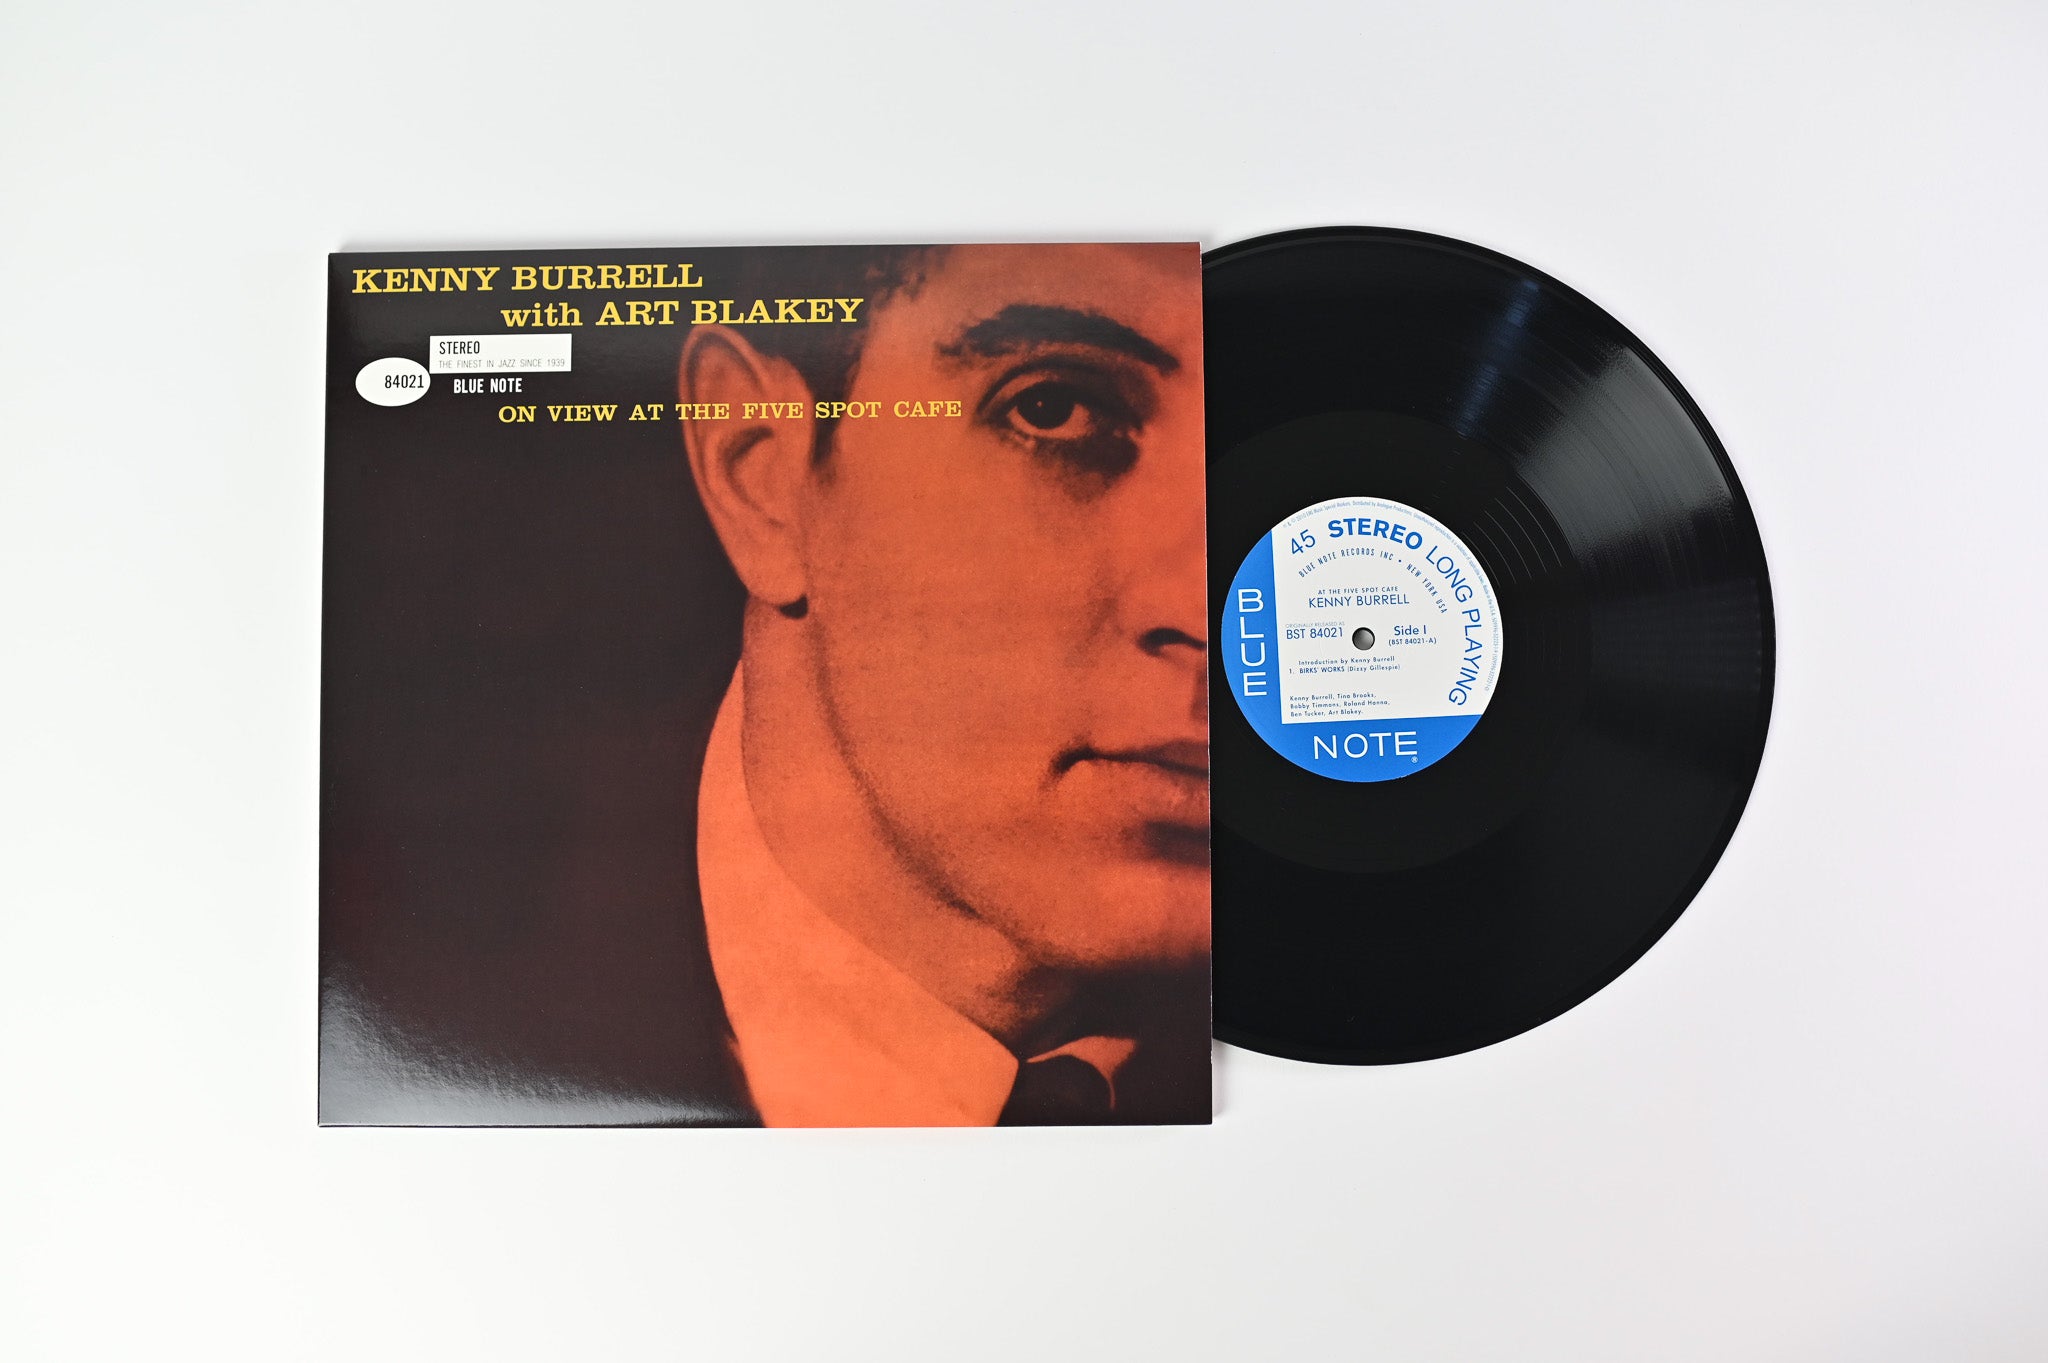 Kenny Burrell - On View At The Five Spot Cafe on Blue Note Analogue Productions Reissue Numbered 45 RPM